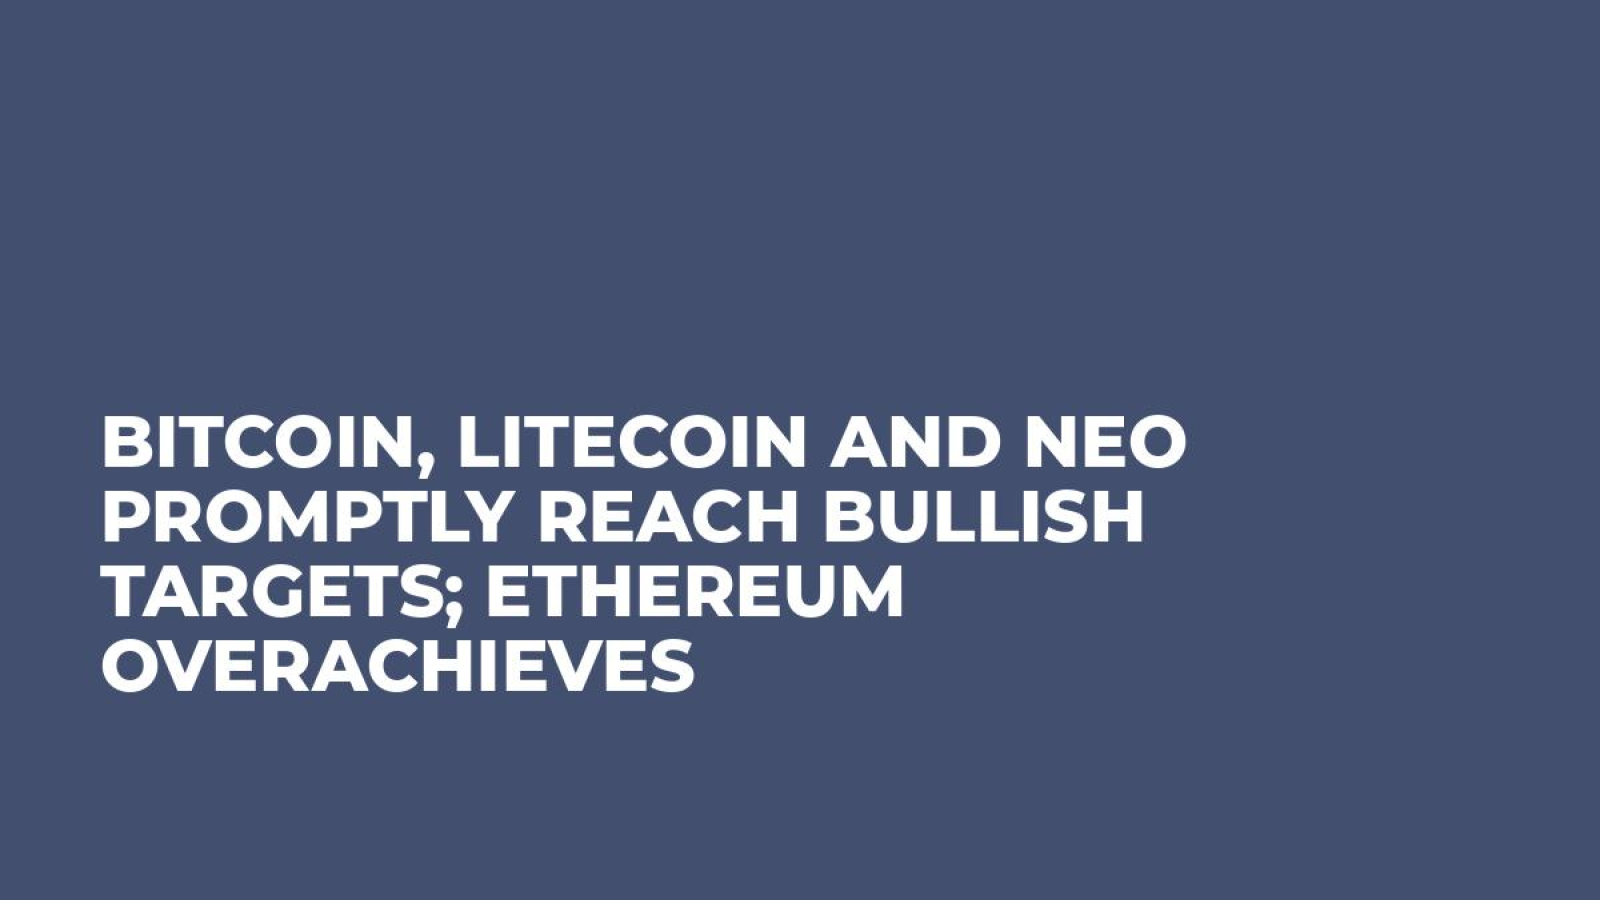 Bitcoin, Litecoin and NEO Promptly Reach Bullish Targets; Ethereum Overachieves